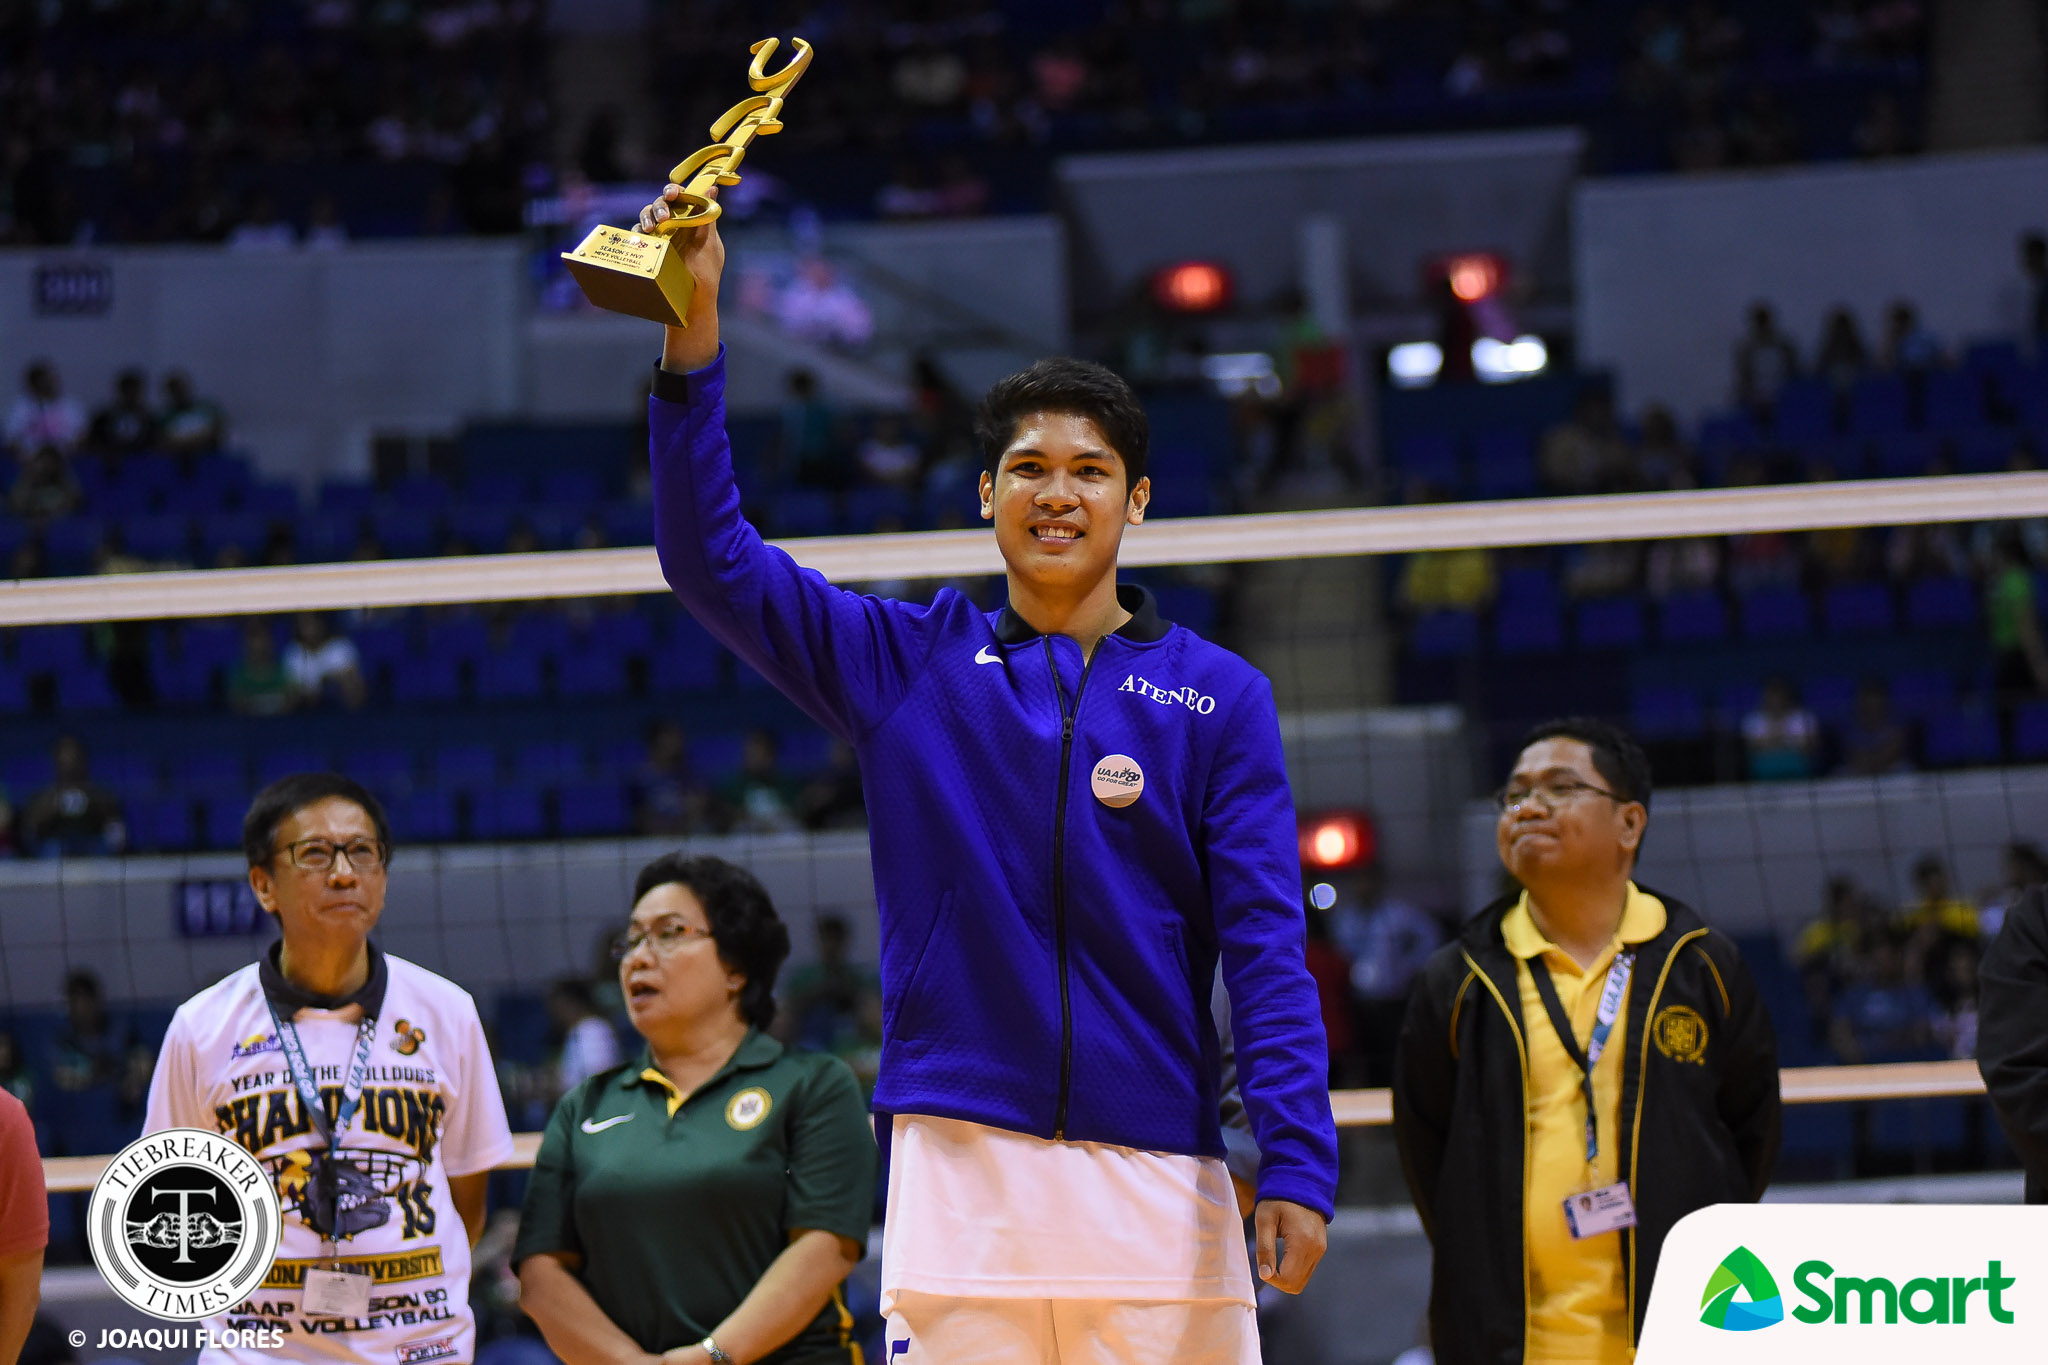 UAAP-80-Volleyball-Awarding-Espejo-3948 After fruitful UAAP career, Marck Espejo looks to take act overseas ADMU News UAAP Volleyball  - philippine sports news